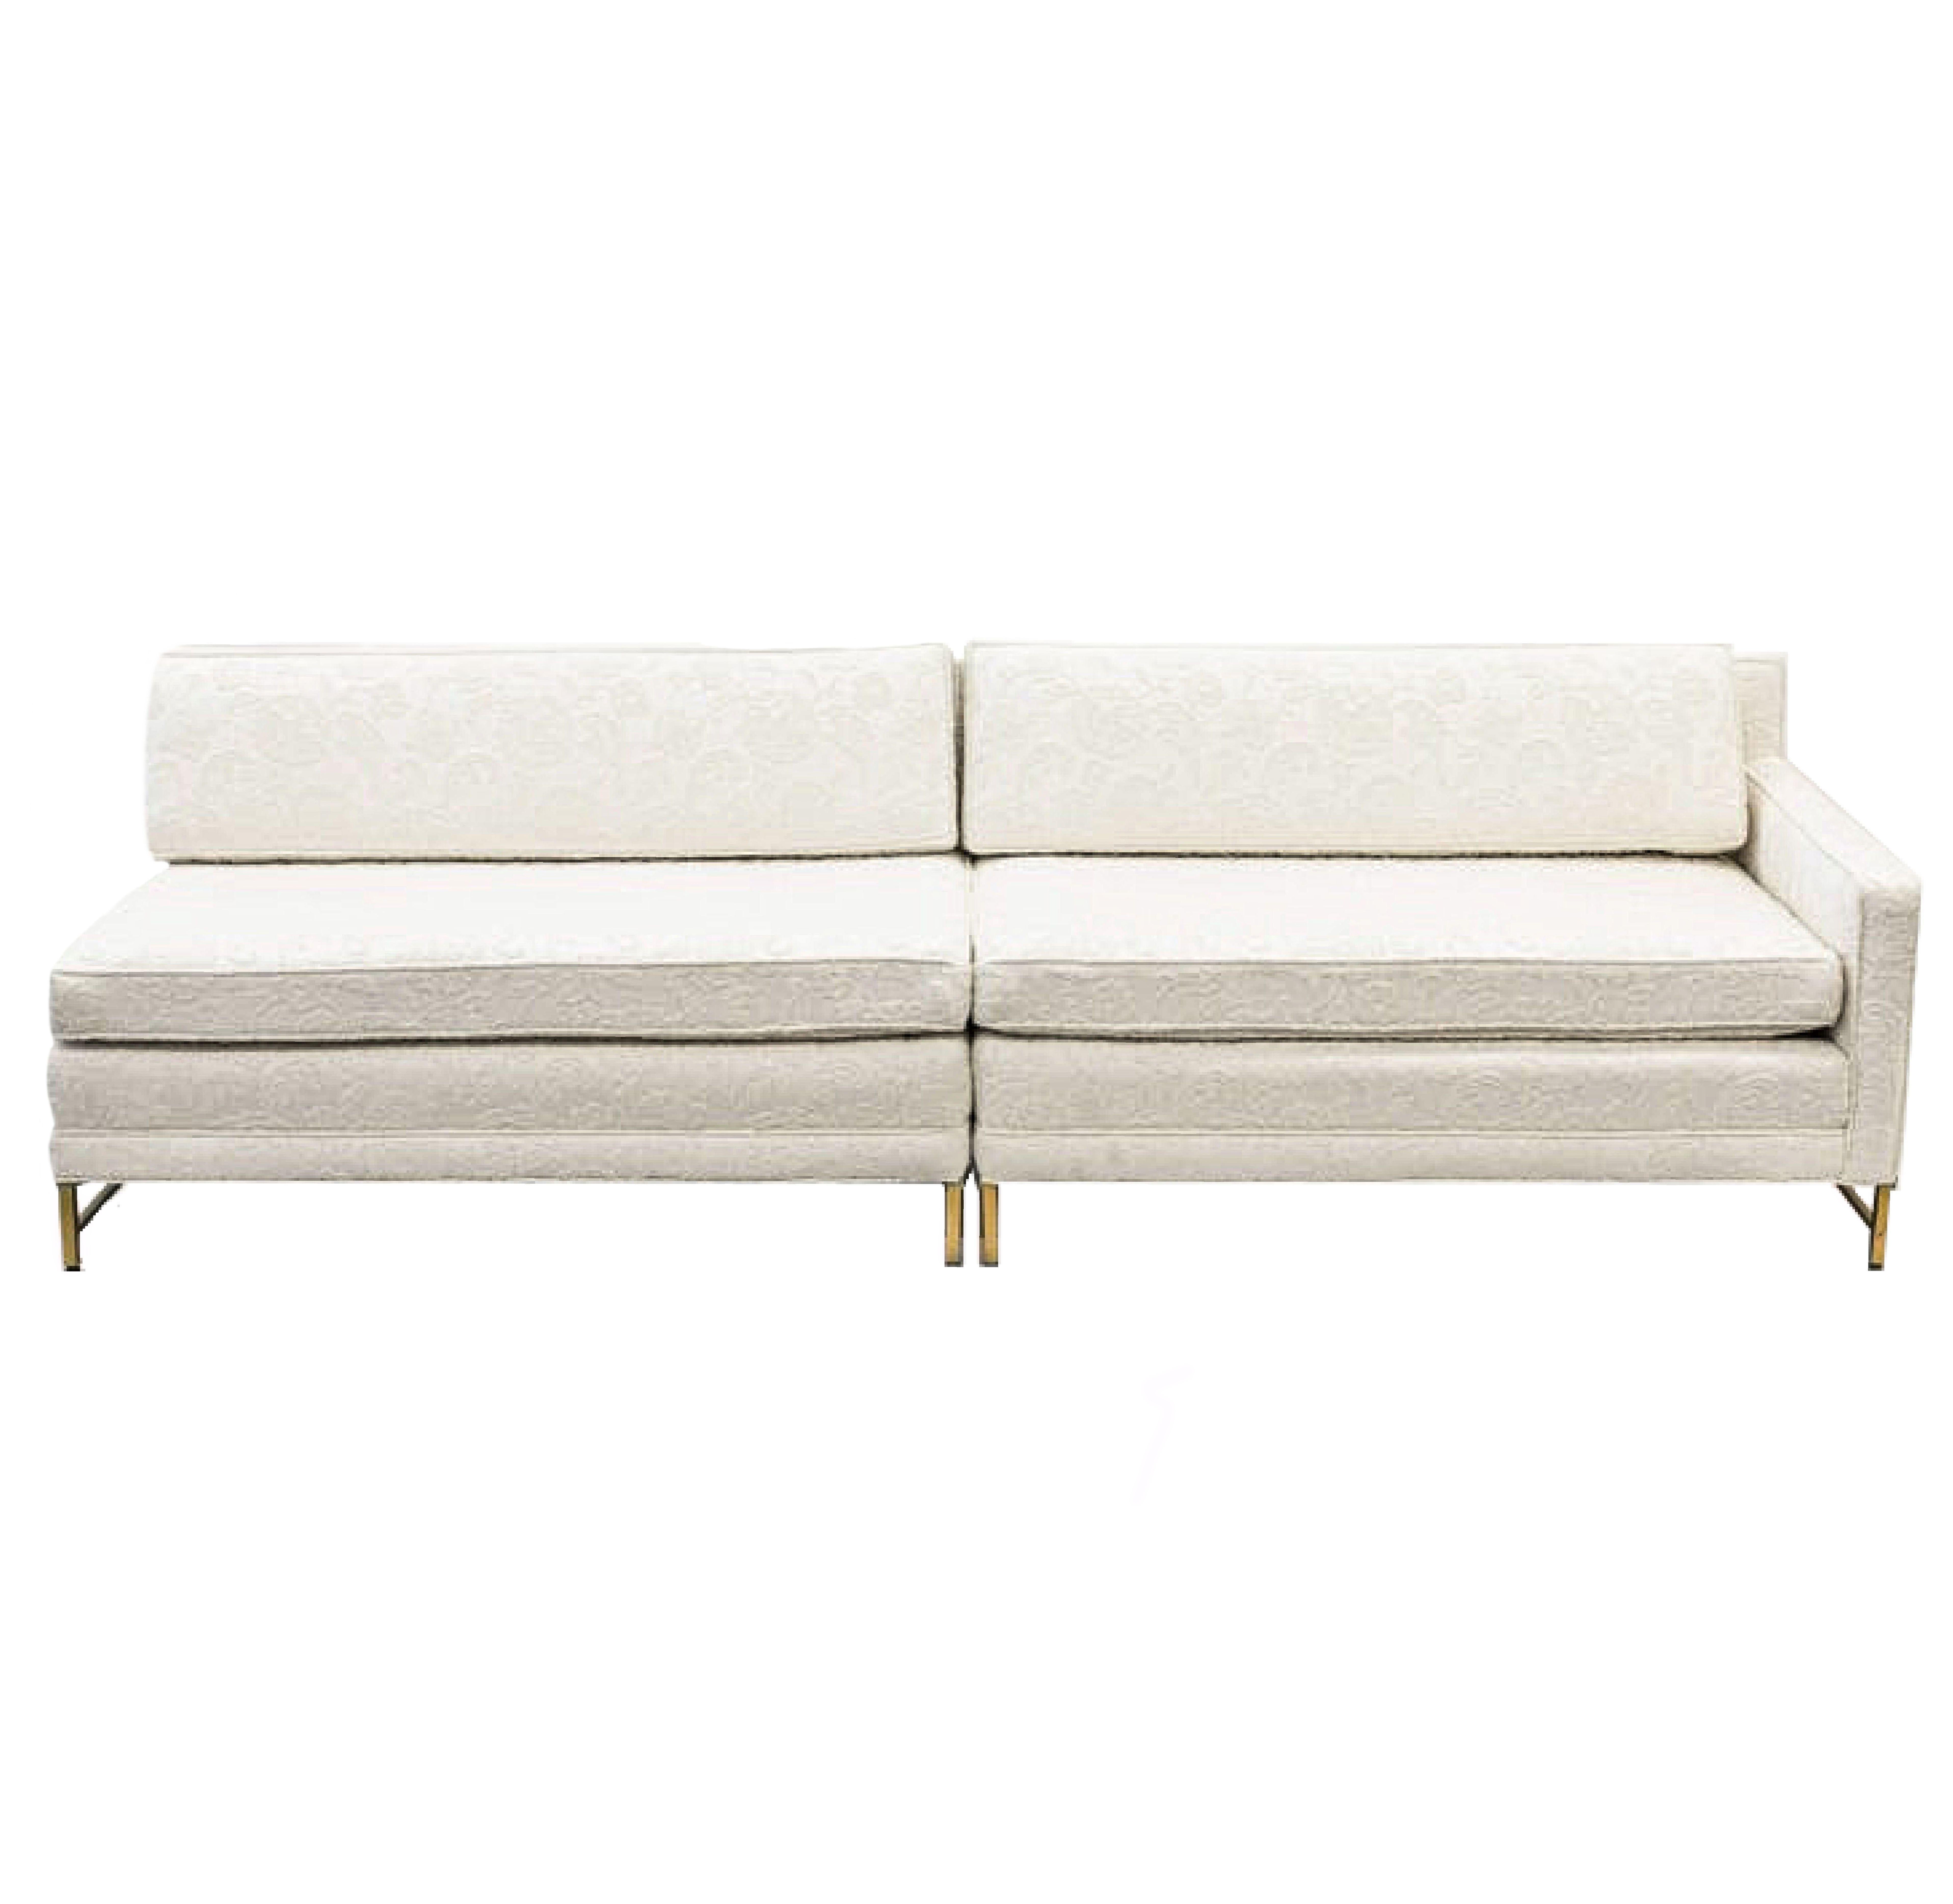 white sectional couch